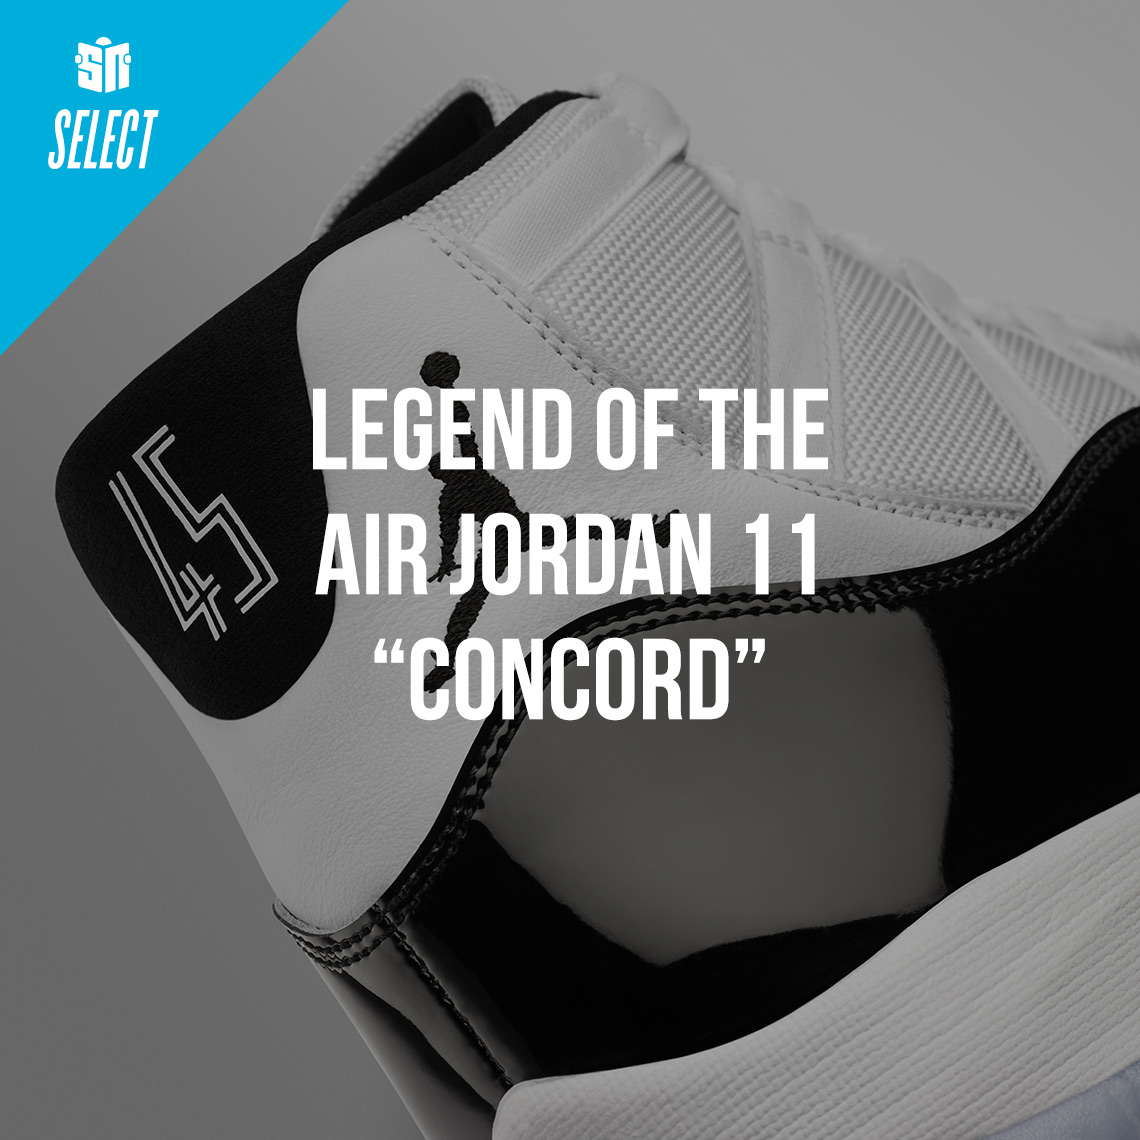 The Legend Of The Air Jordan 11 "Concord"